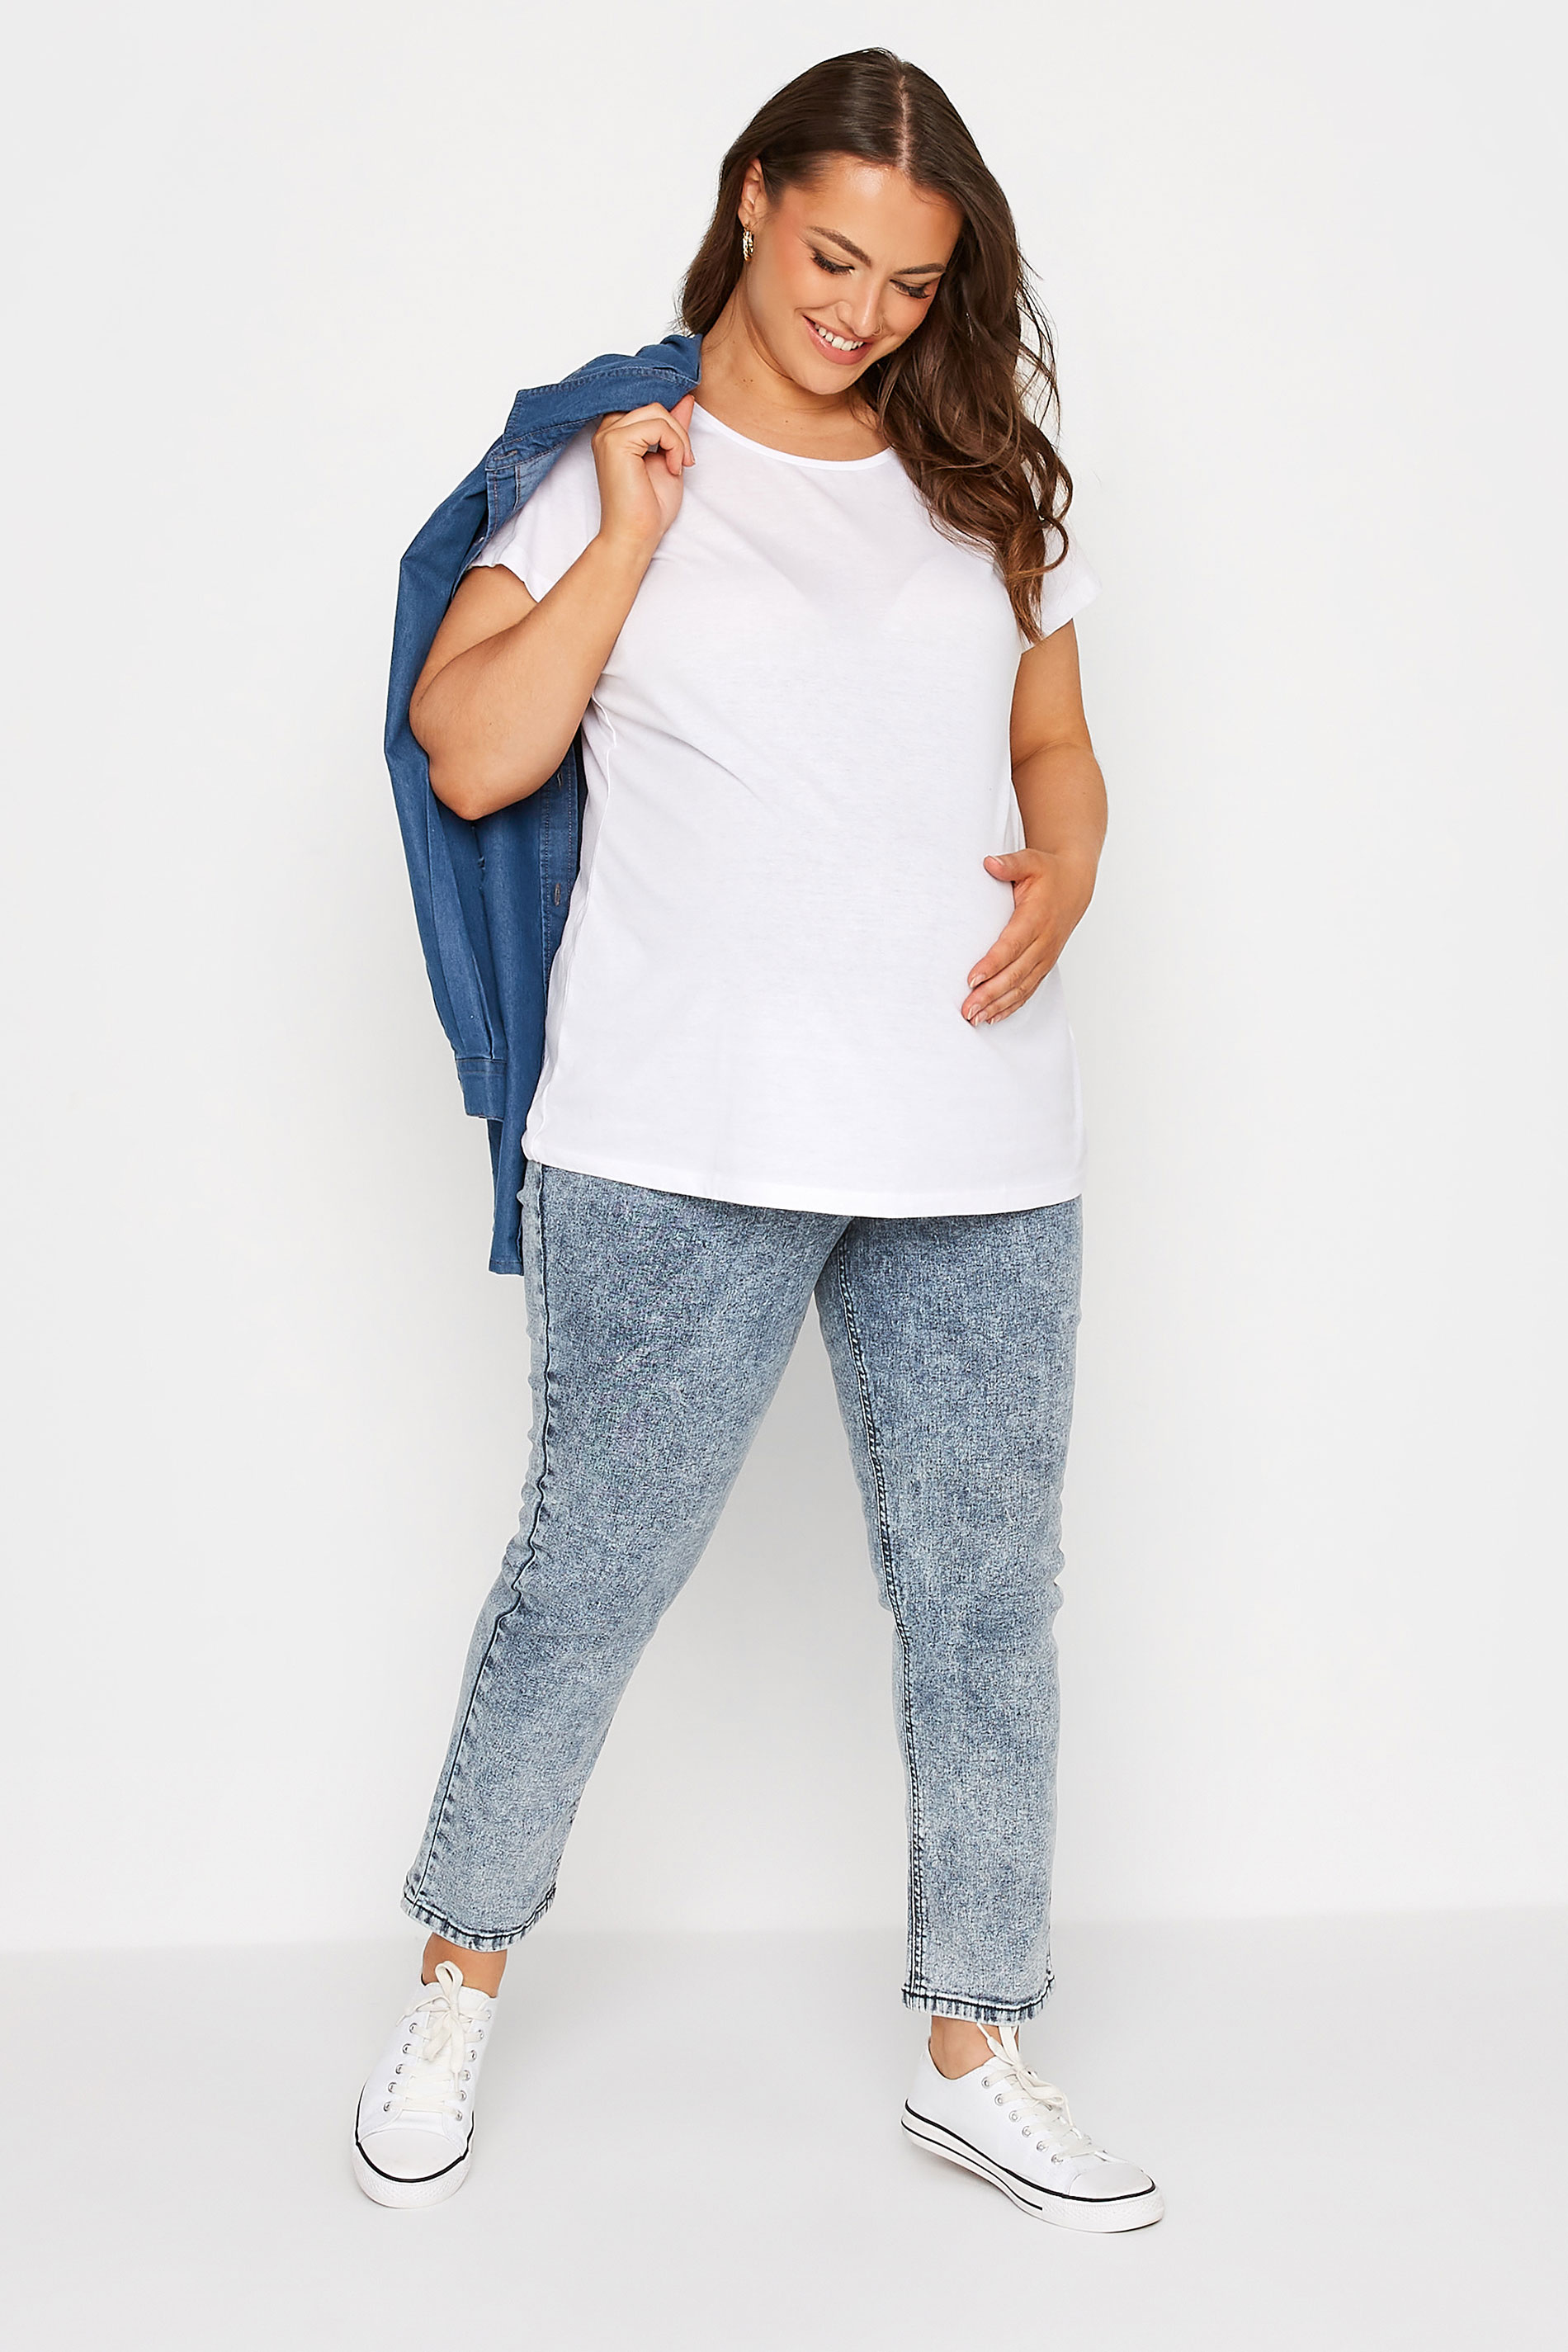 BUMP IT UP MATERNITY Plus Size Bleach Blue Mom Jeans | Yours Clothing  2